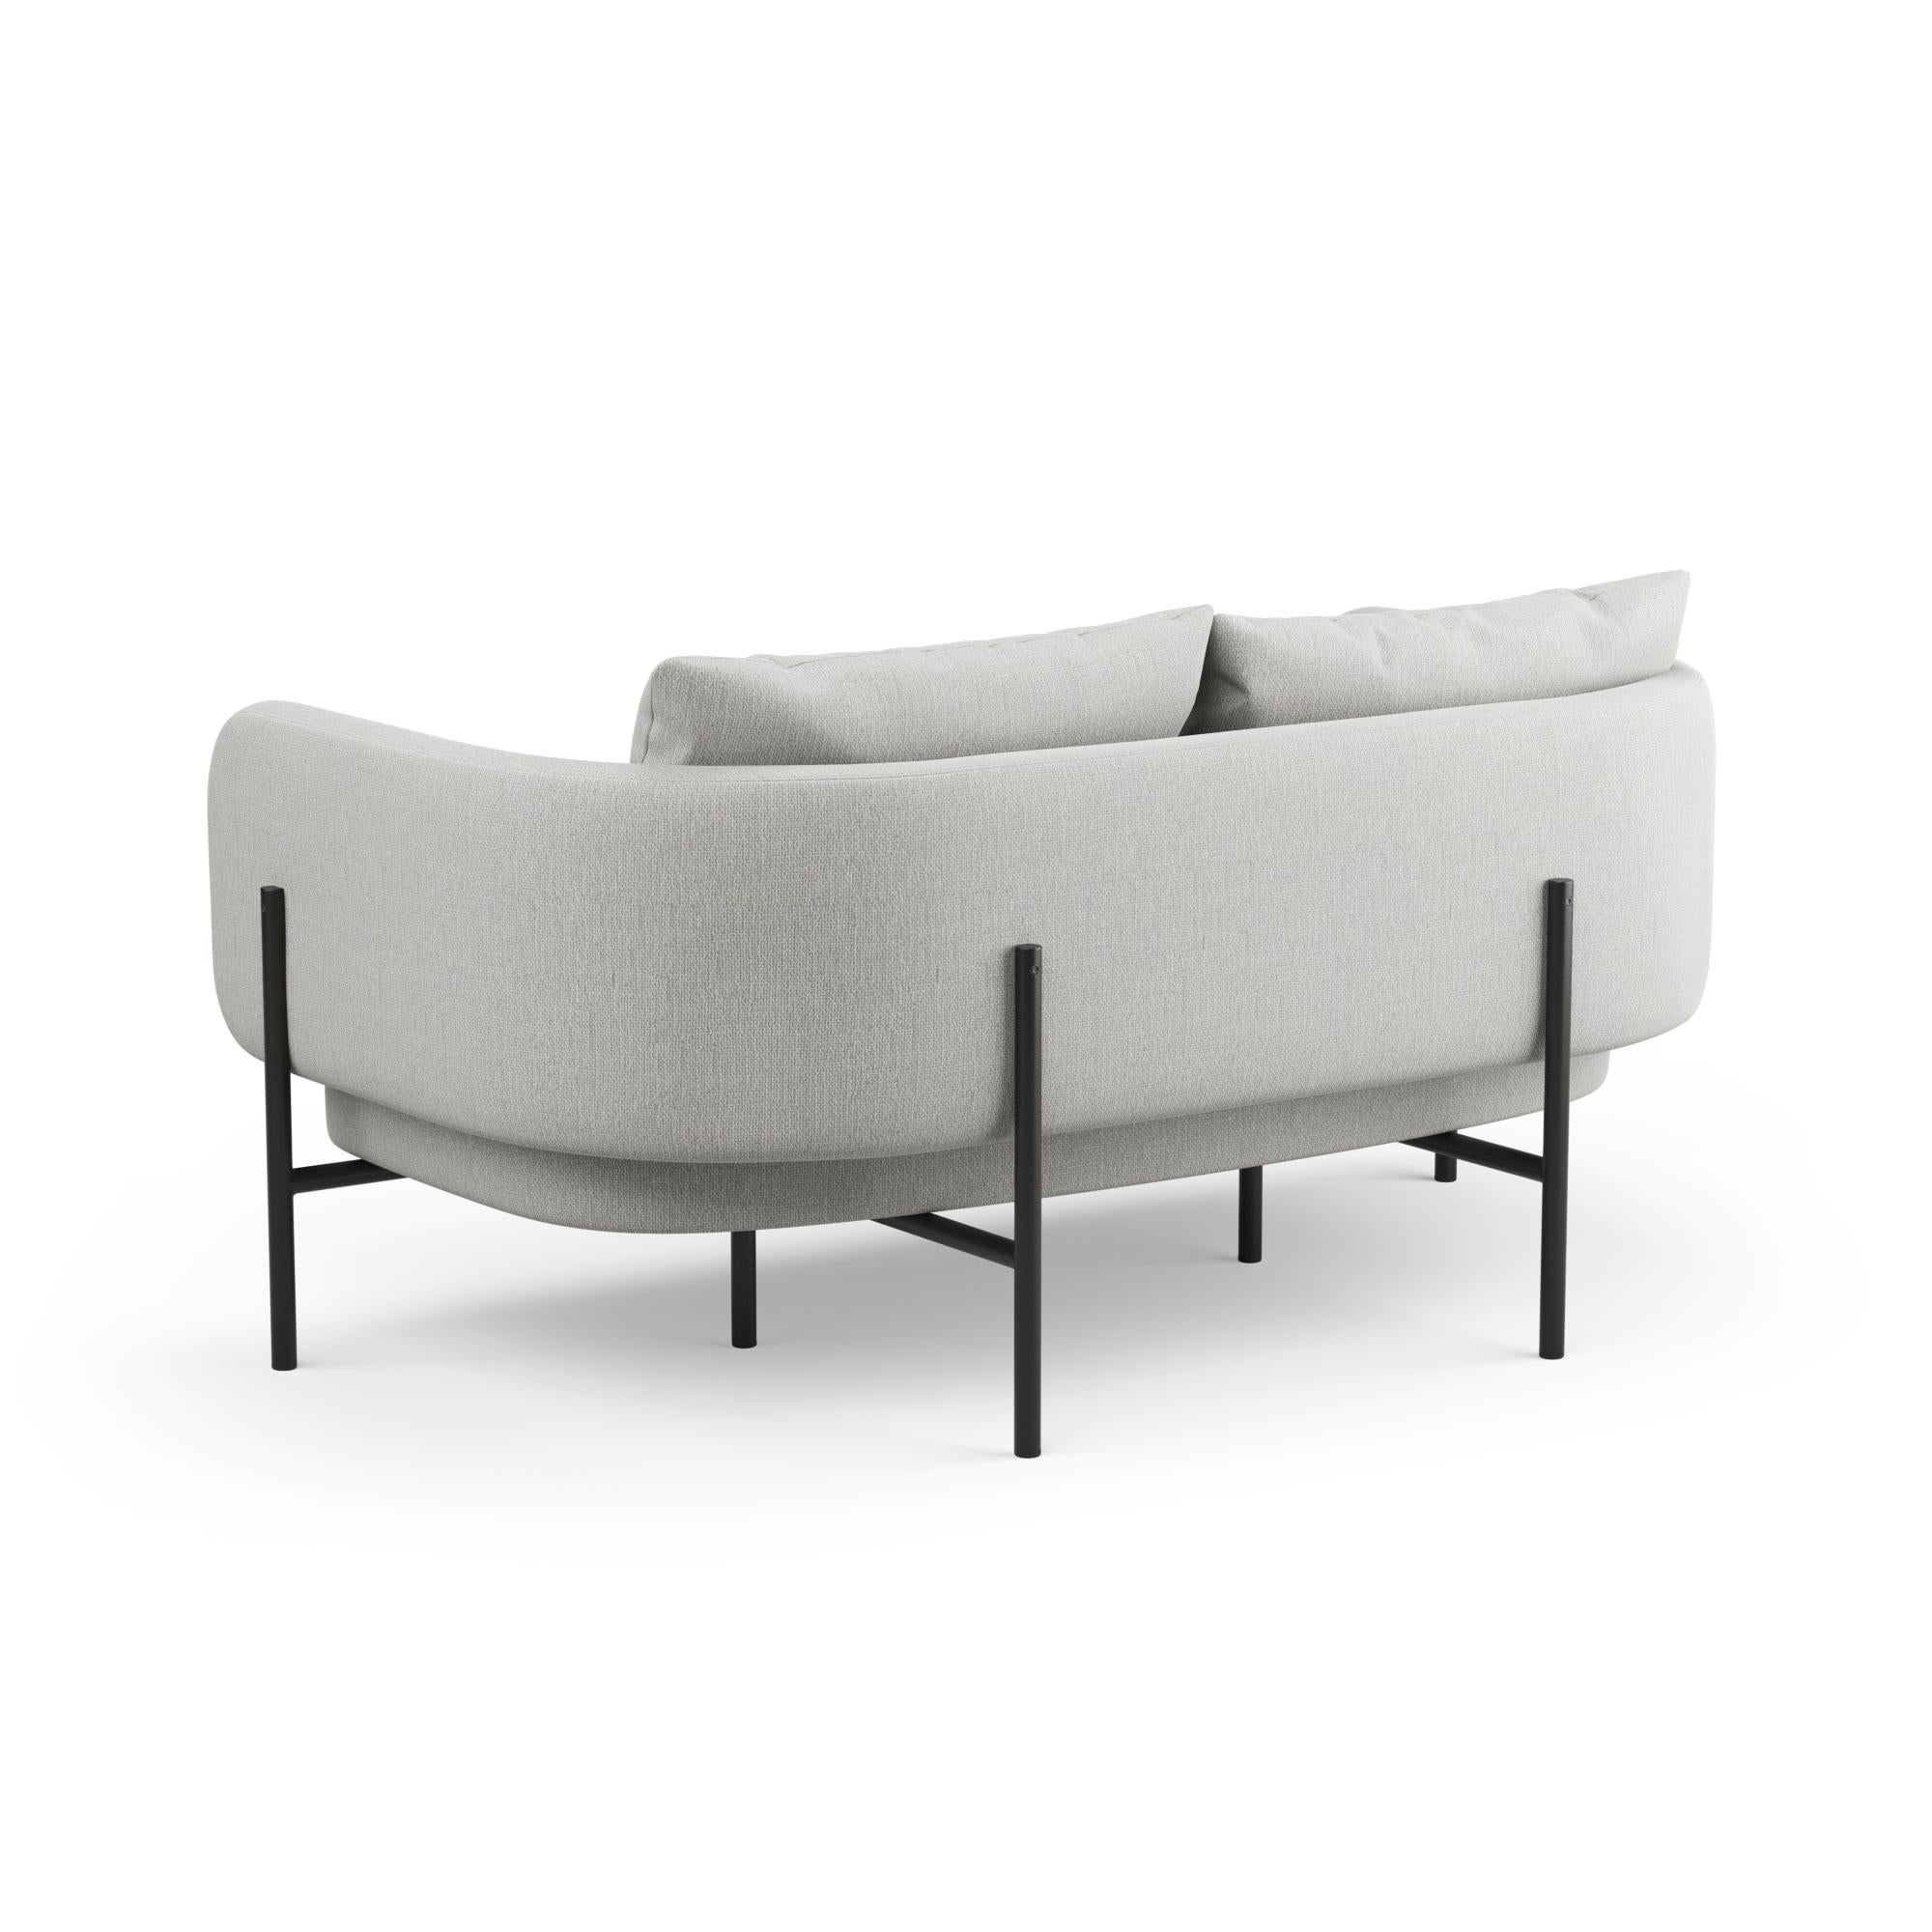 European Hayche Abrazo 2 Seater Sofa - Gravel, UK, Made to Order For Sale